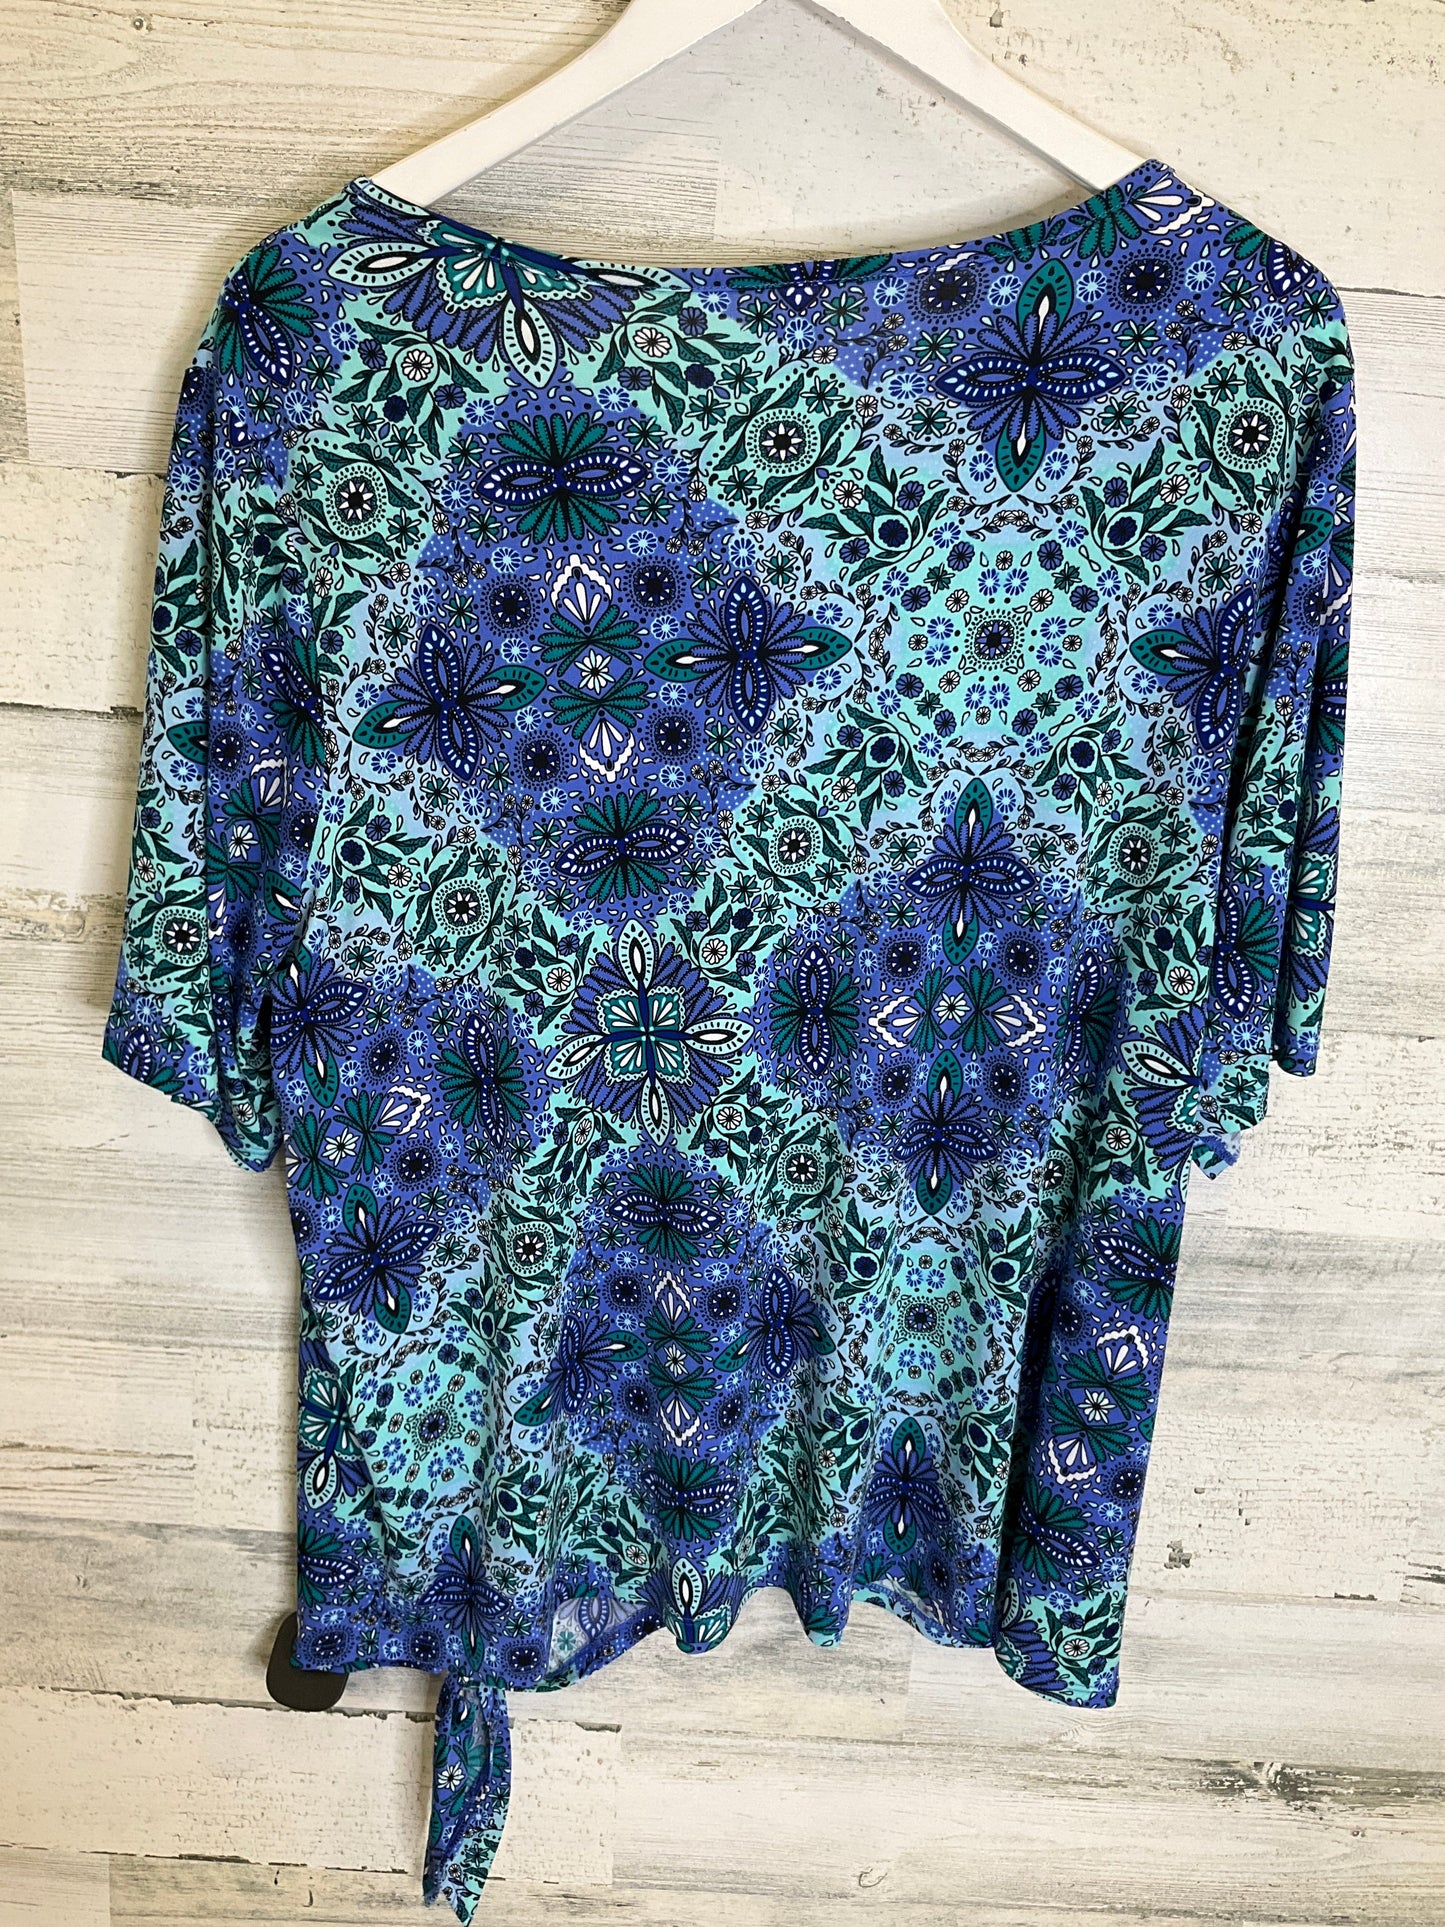 Blue Top Short Sleeve East 5th, Size 3x